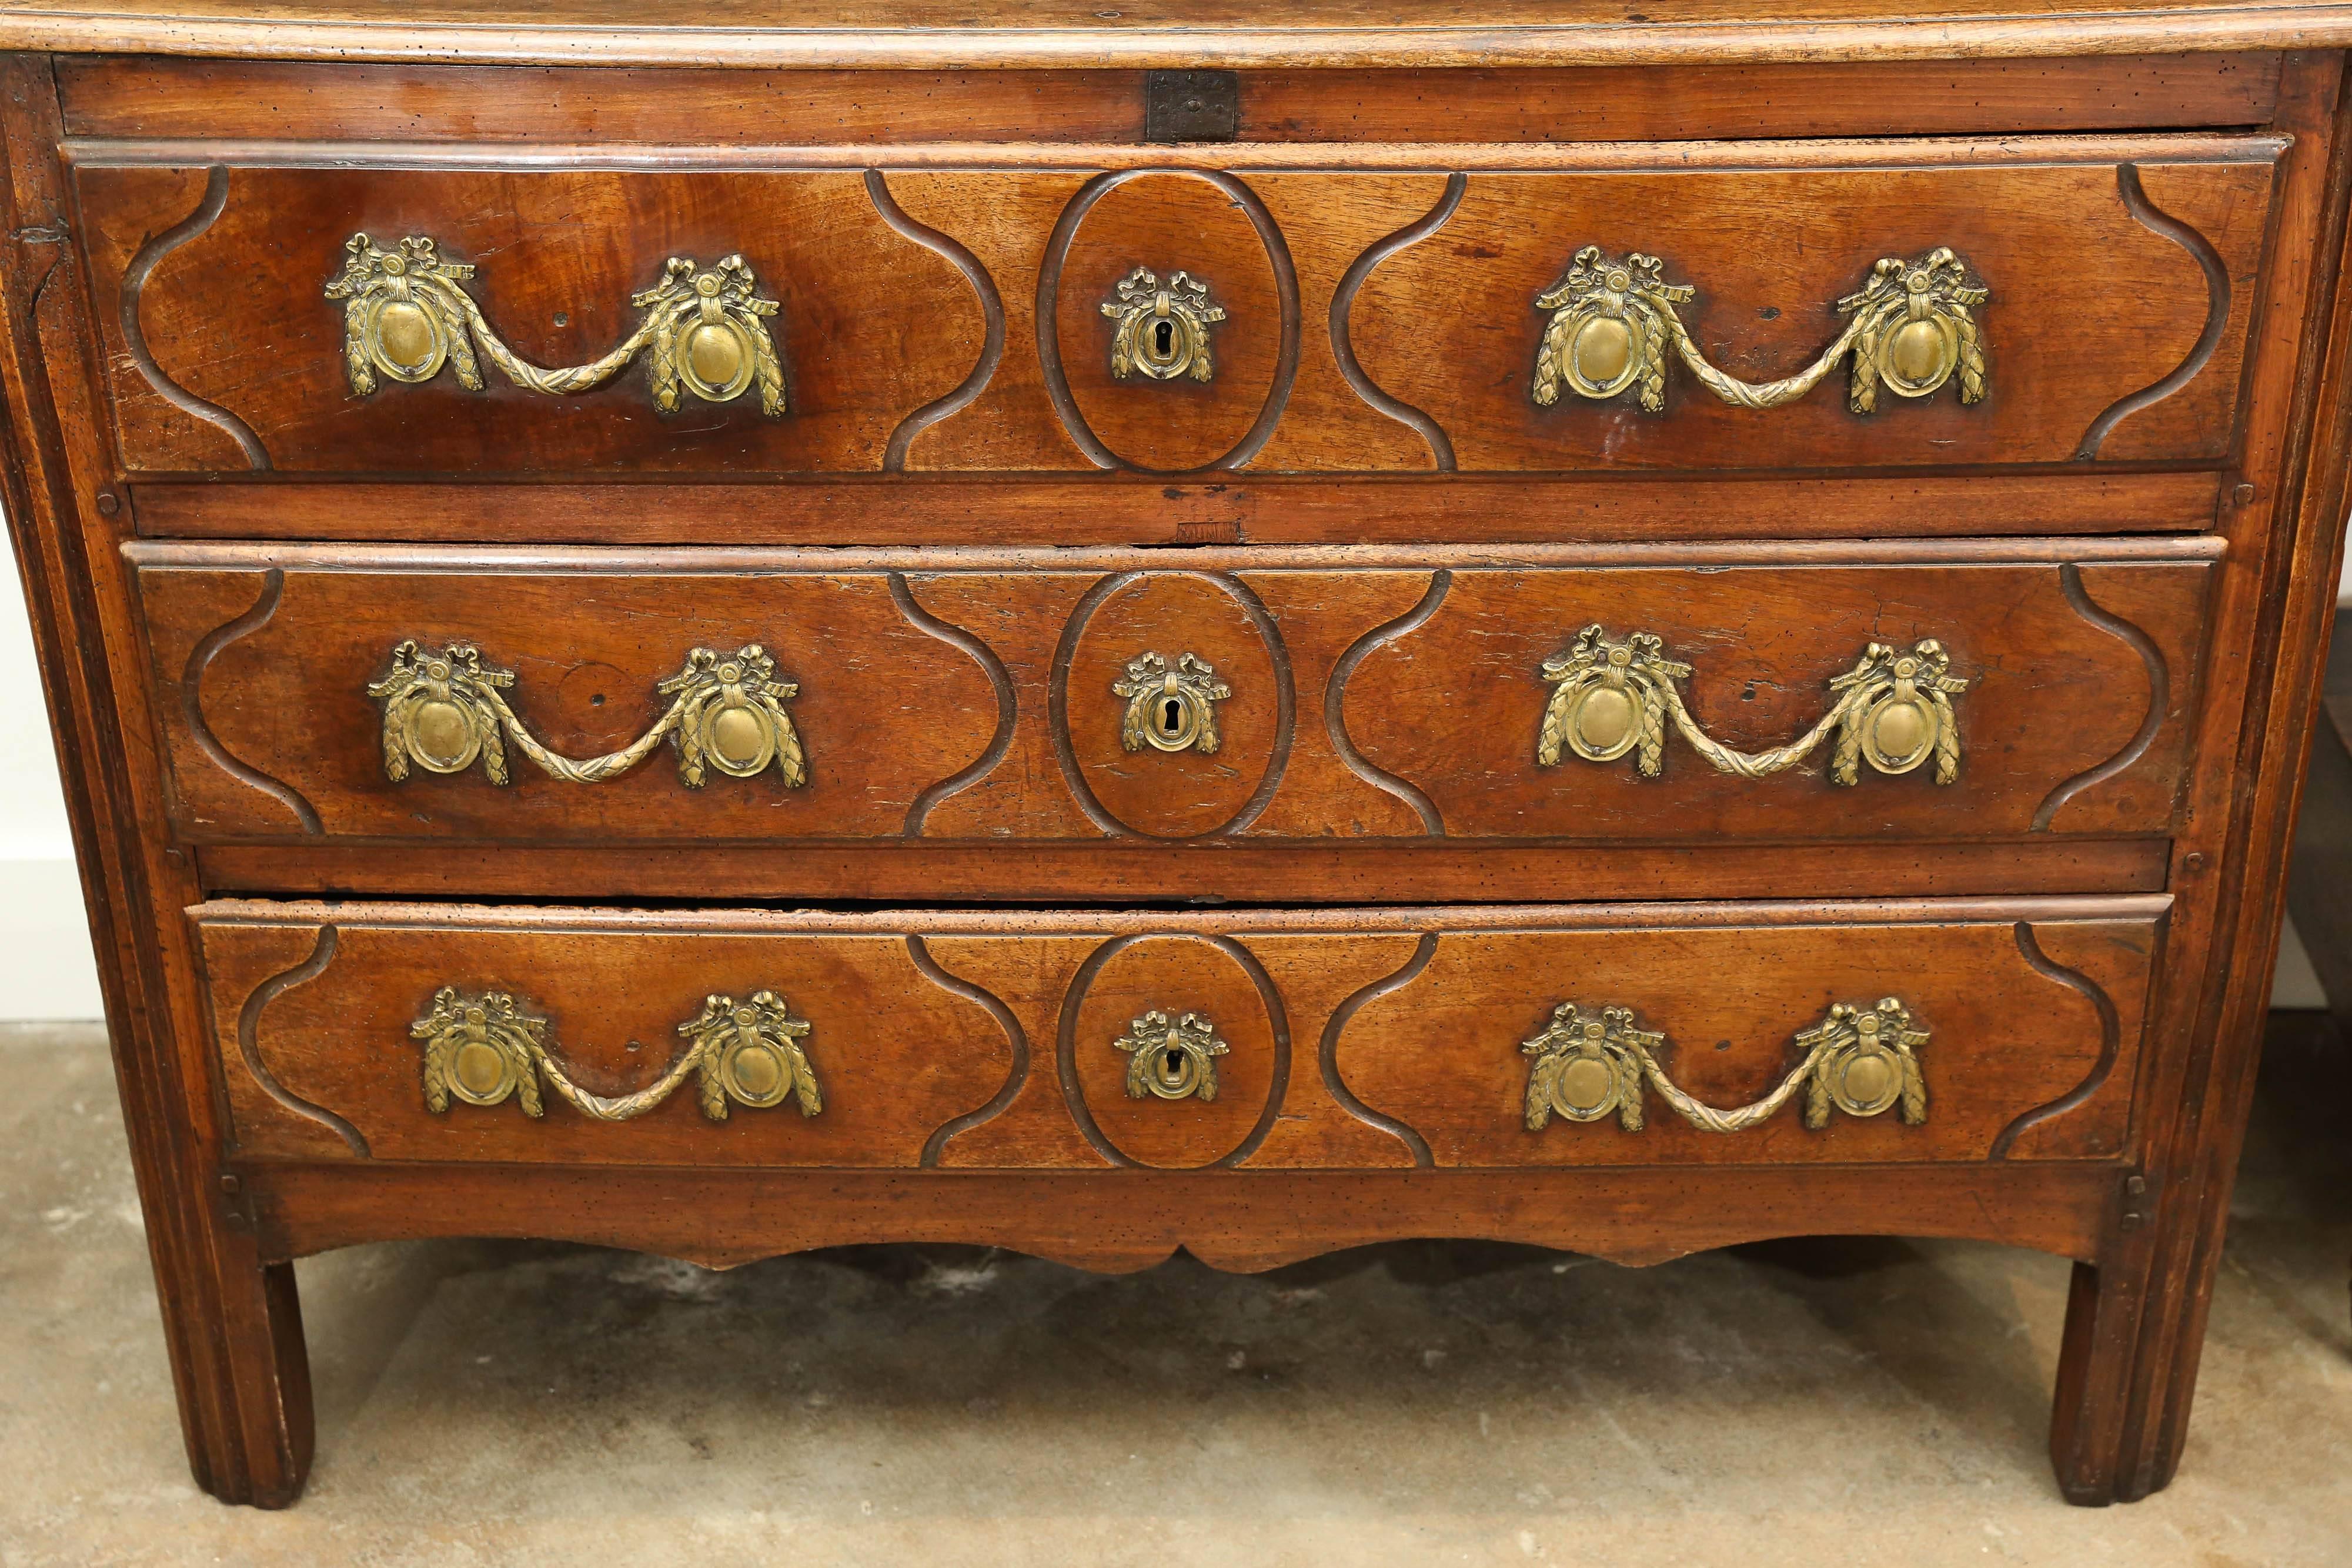 Antique 18th century Louis XV commode with three long drawers. Wood is walnut and has a beautiful patina. Hardware has been replaced with beautifully intricate bronze dore hardware and commode height has been raised.  Each drawer has deeply incised